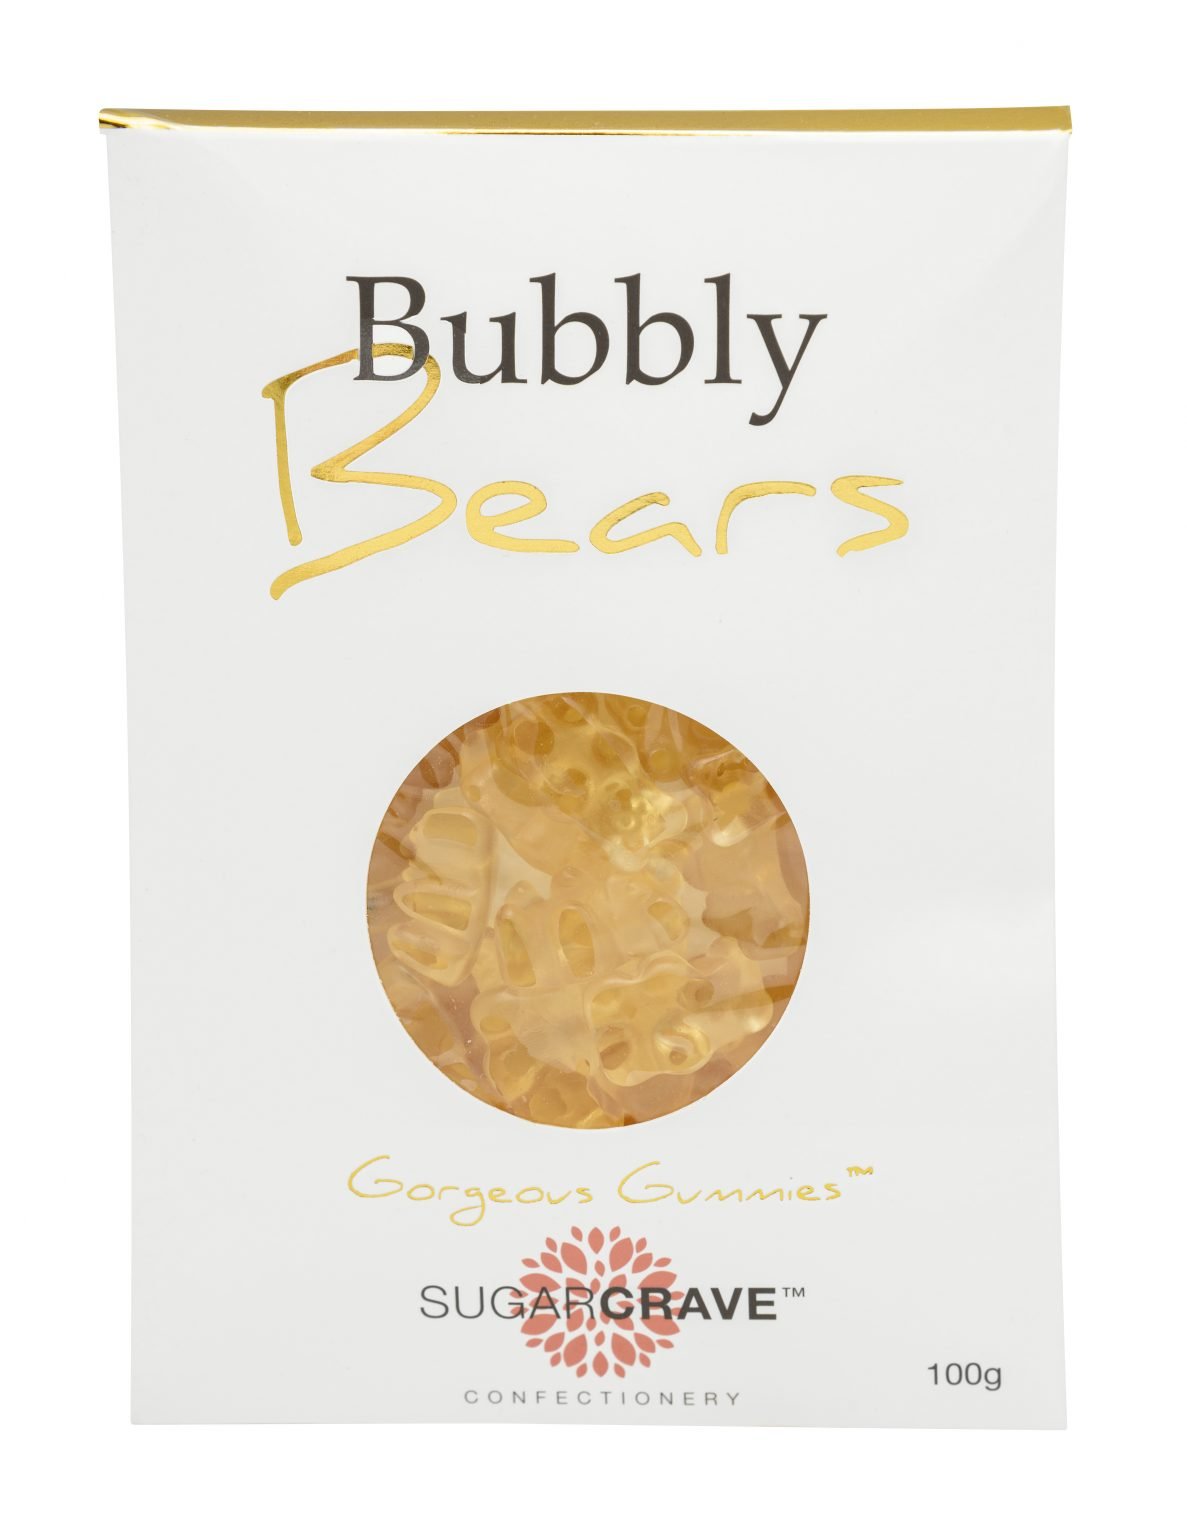 Sugarcrave Bubbly Bears Pouch - Beautiful Gifts - Packaged with Love